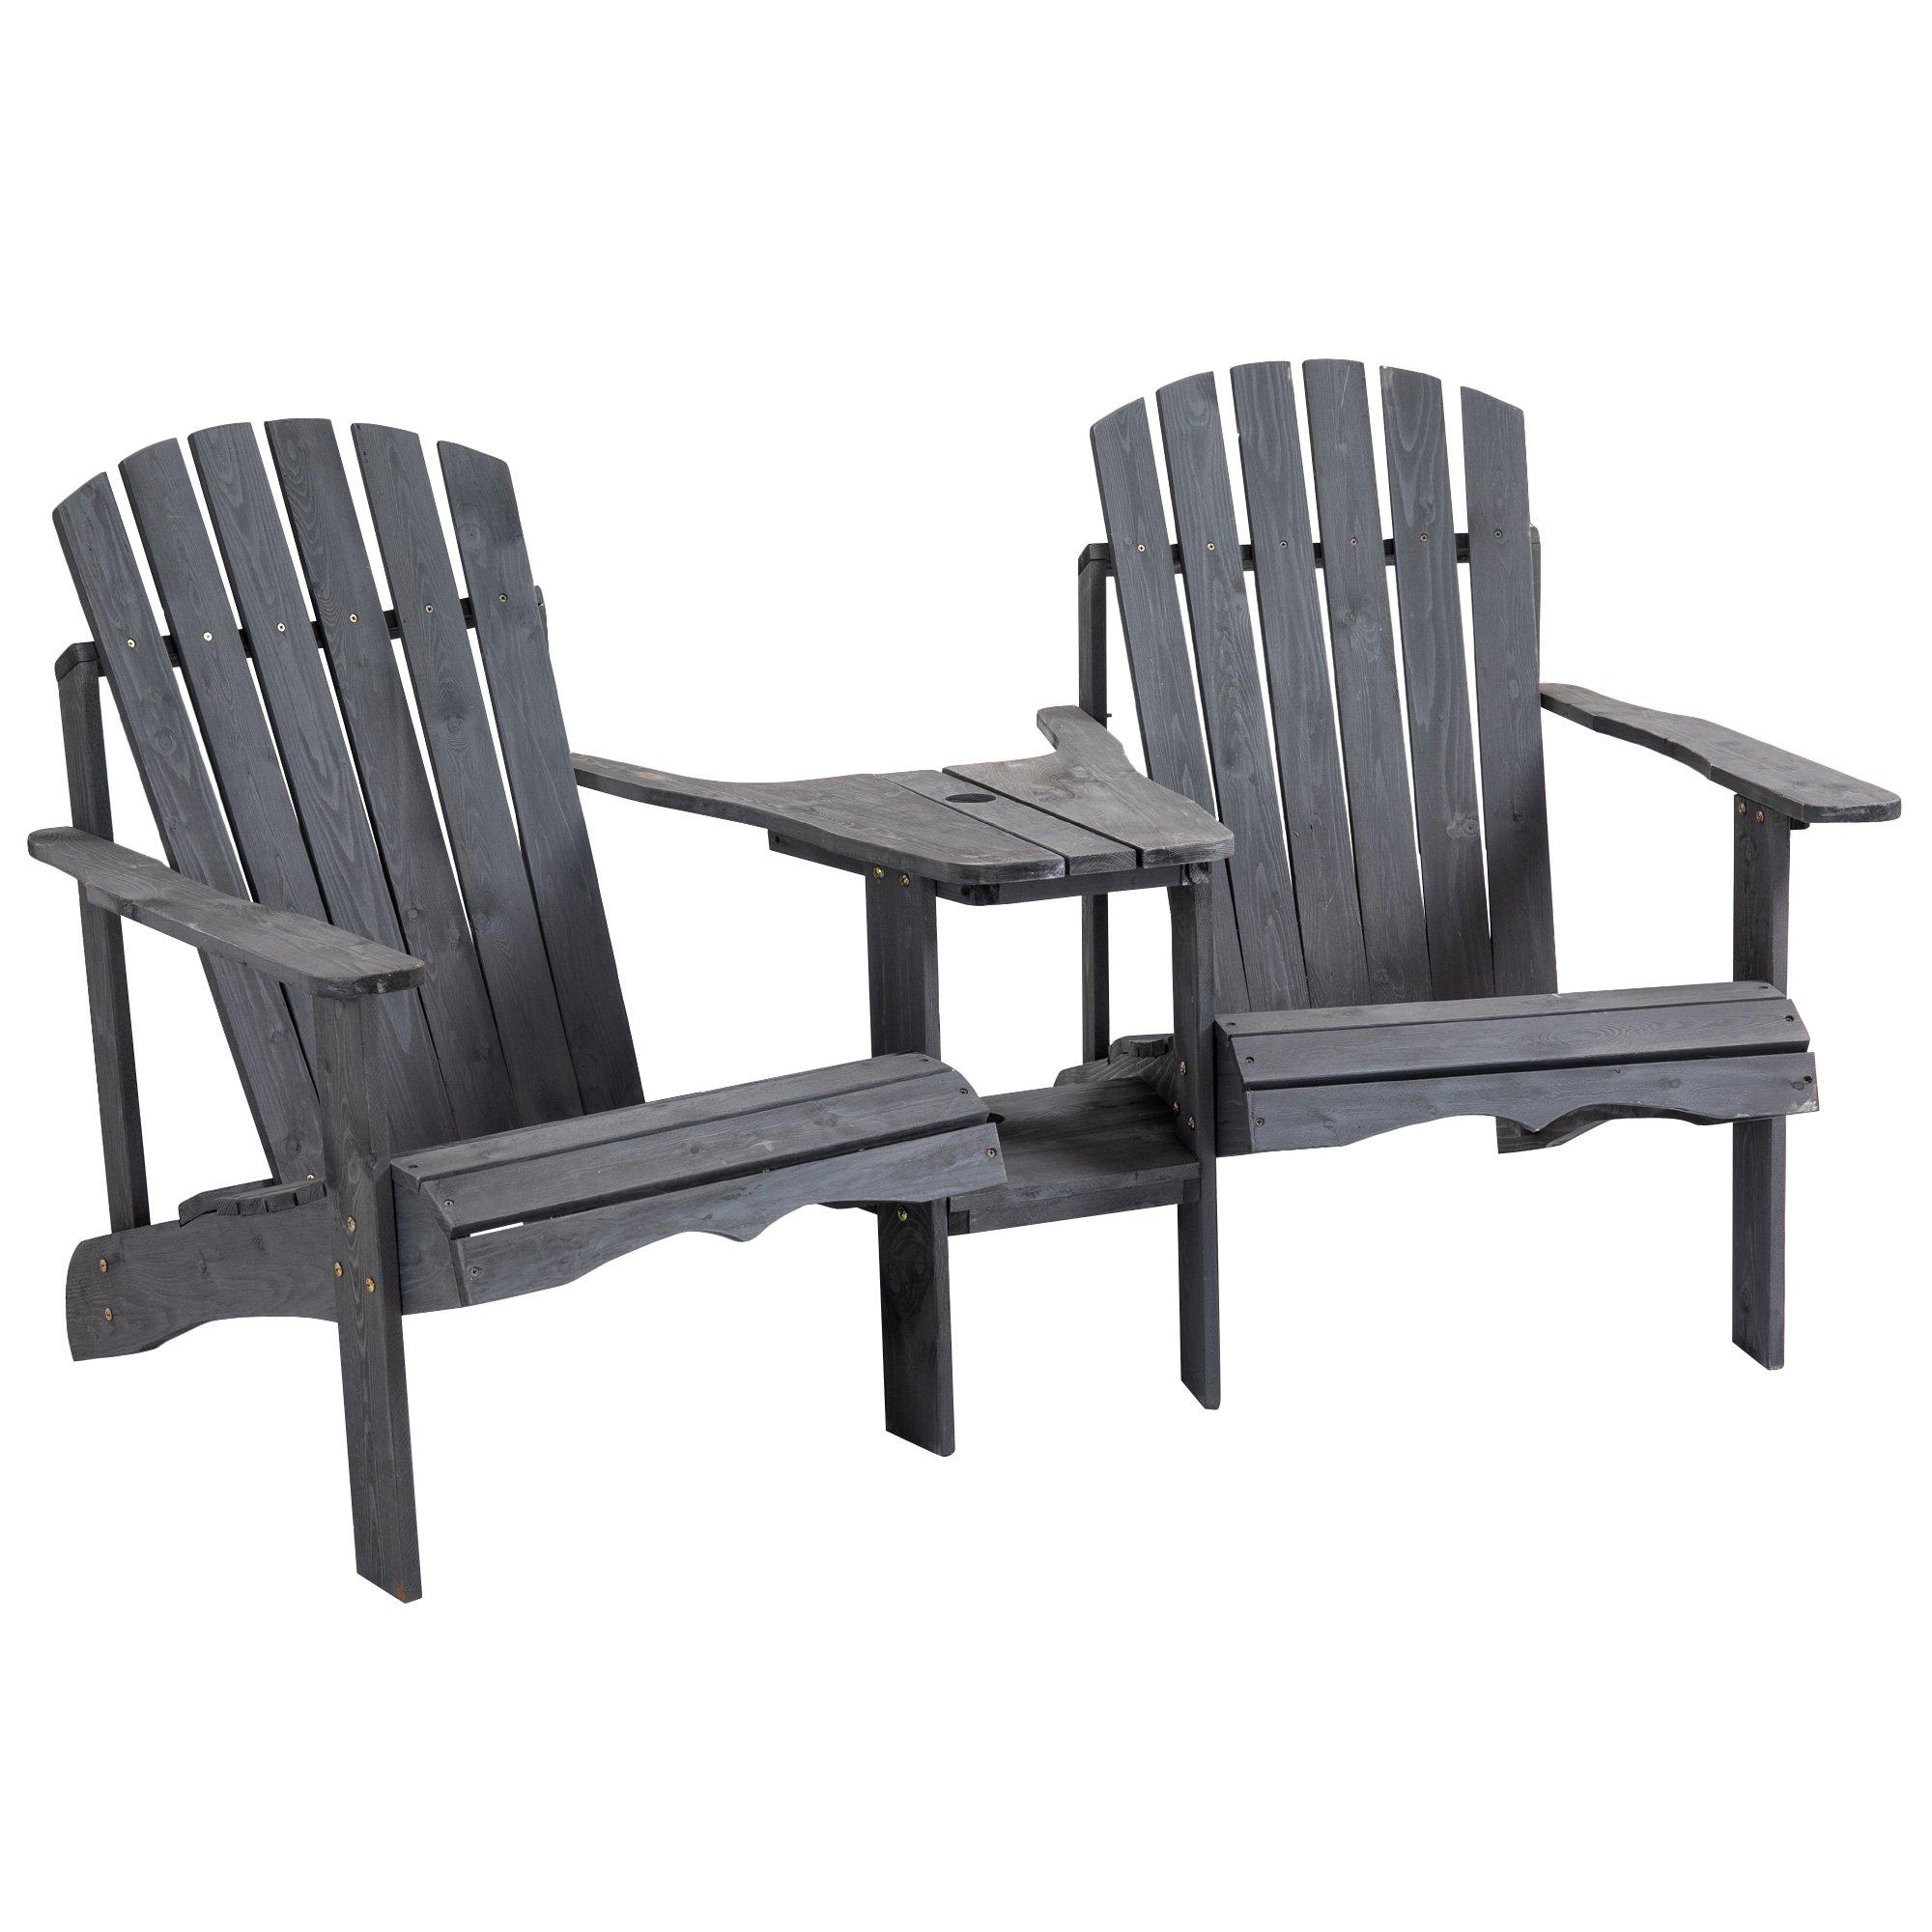 Wooden Outdoor Double Adirondack Chair with Center Table and Hole